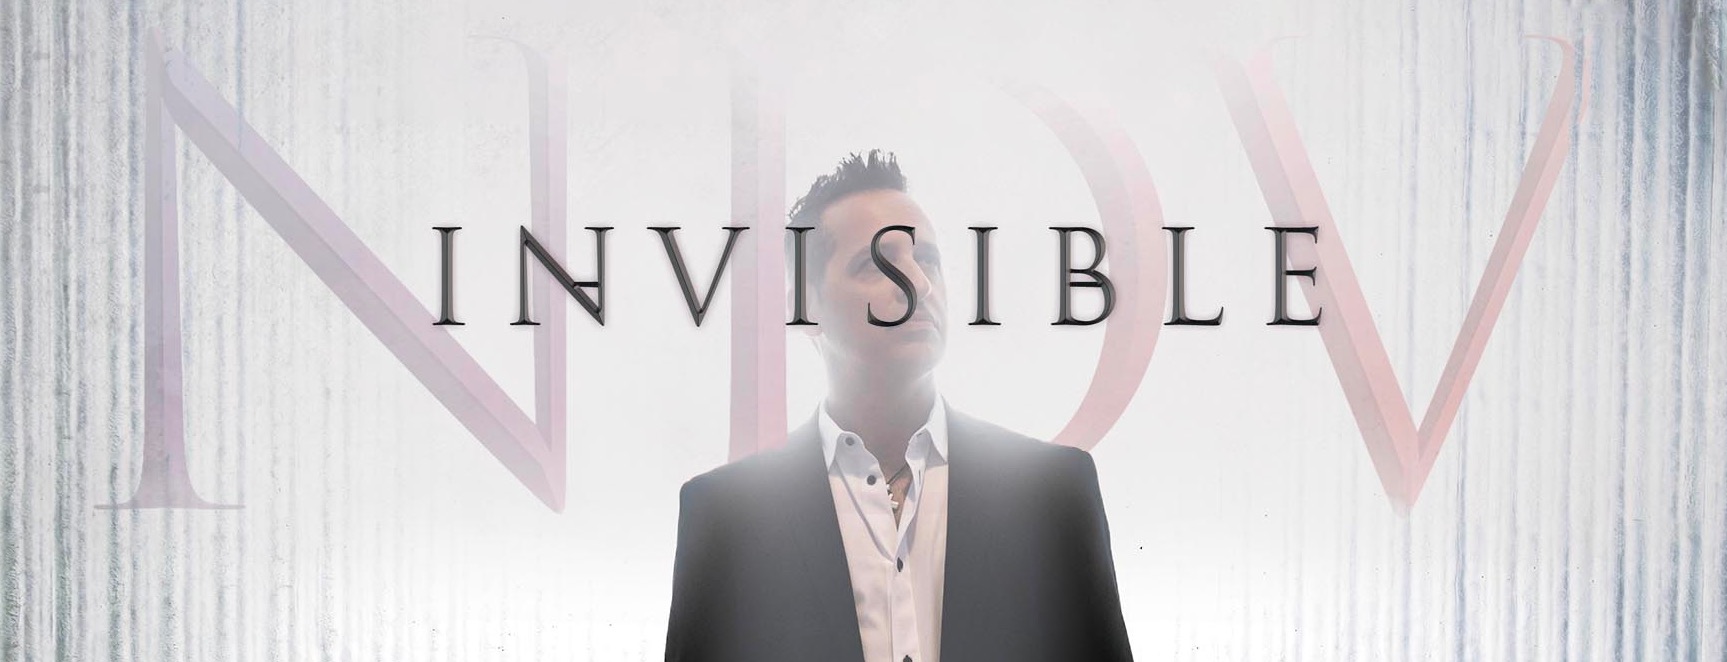 Nick D'Virgilio Invisible